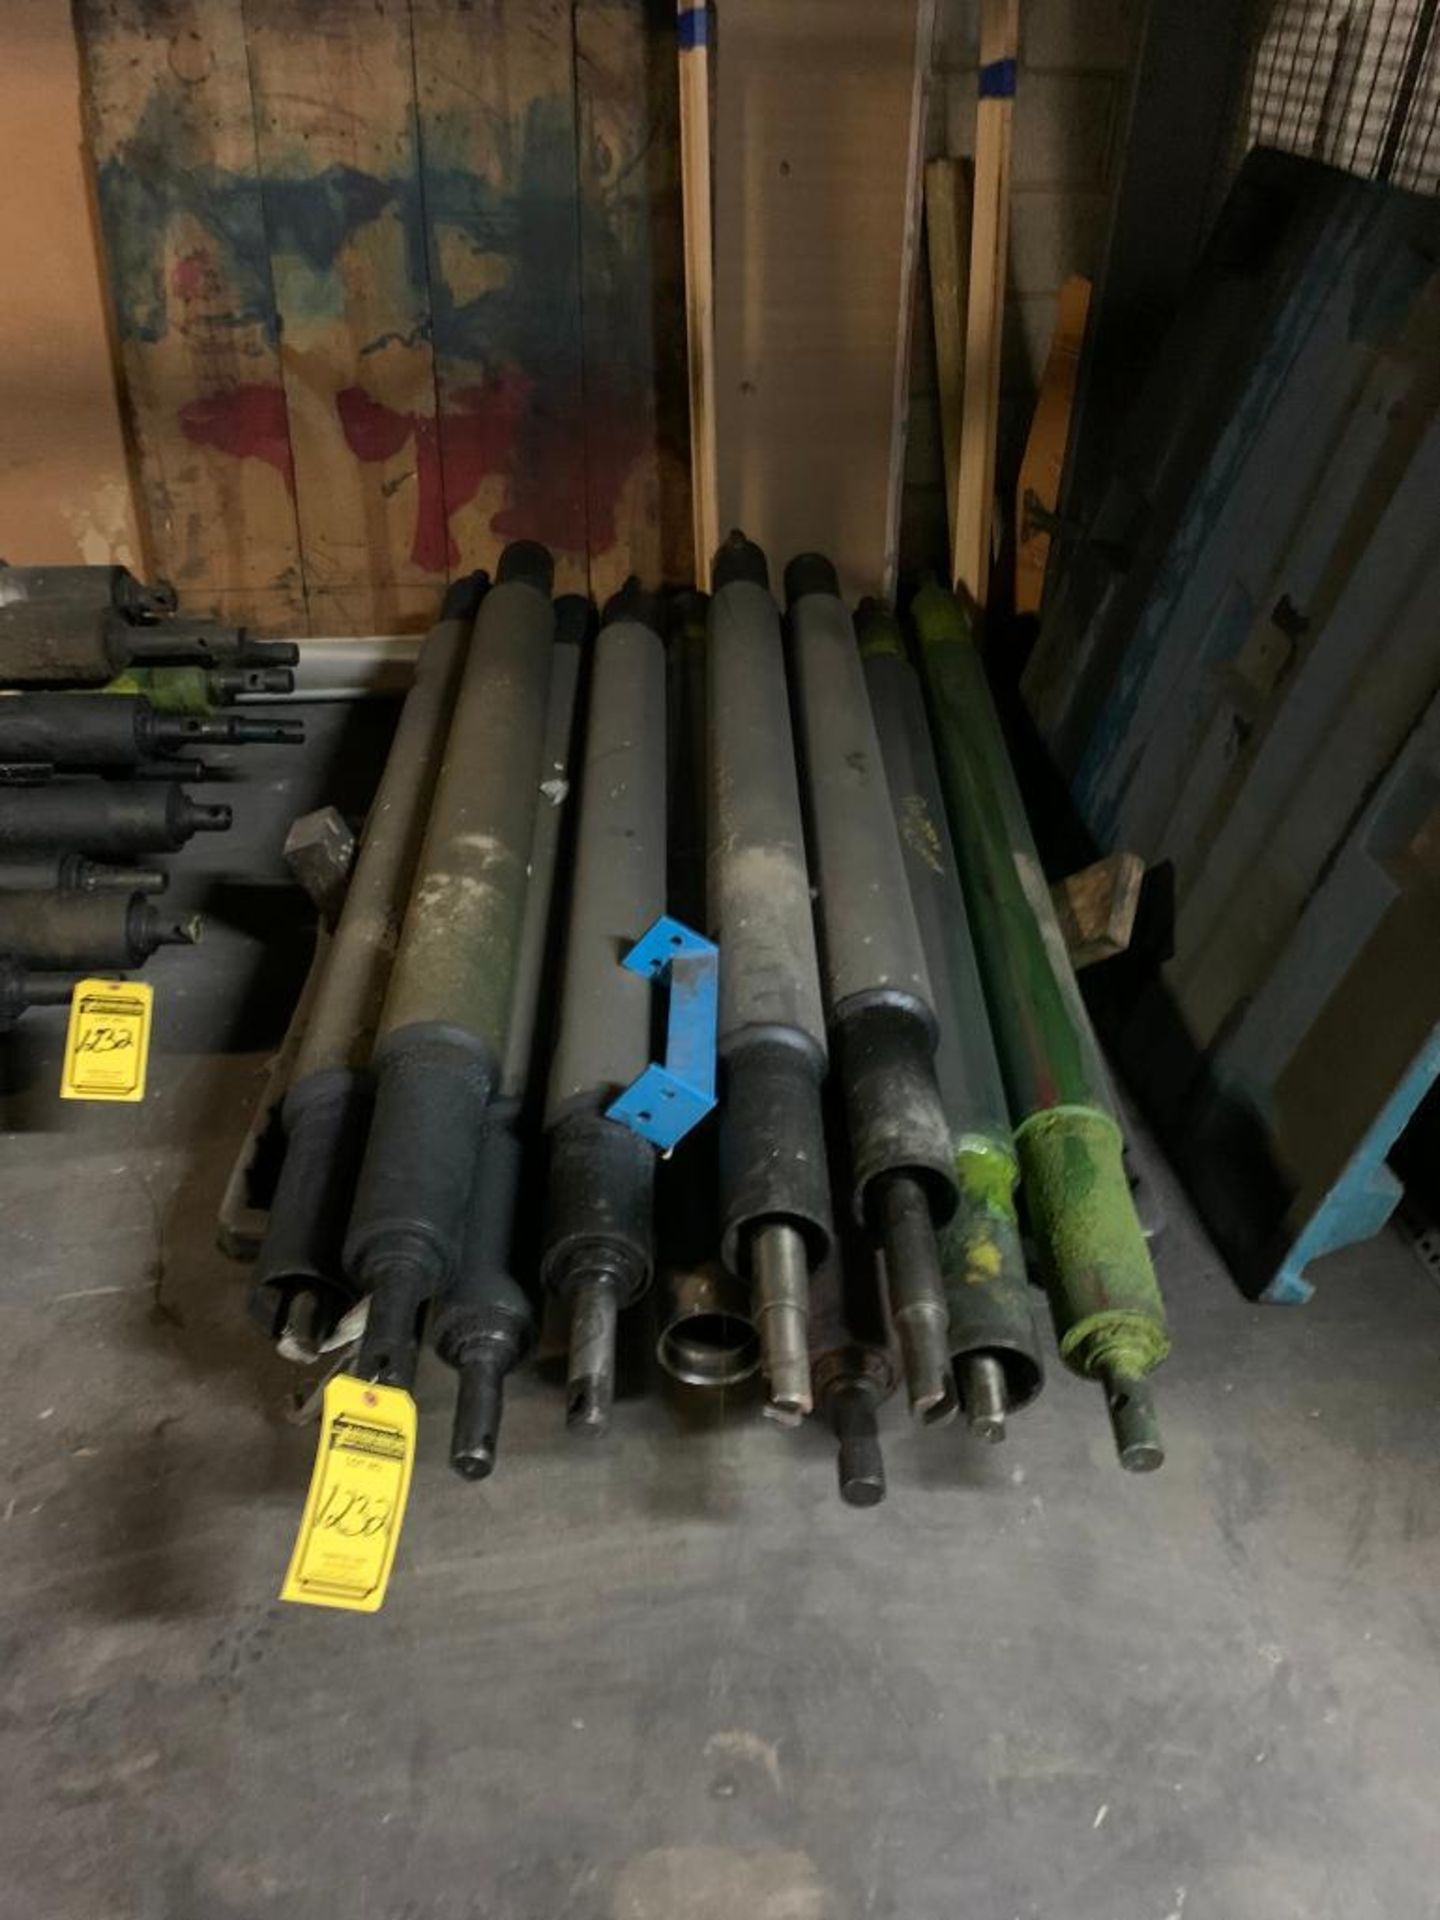 Assorted Press Machine Rolls, Push-Back Rack Pallets, Spools of Hose, Oil Separator Cans - Image 3 of 19